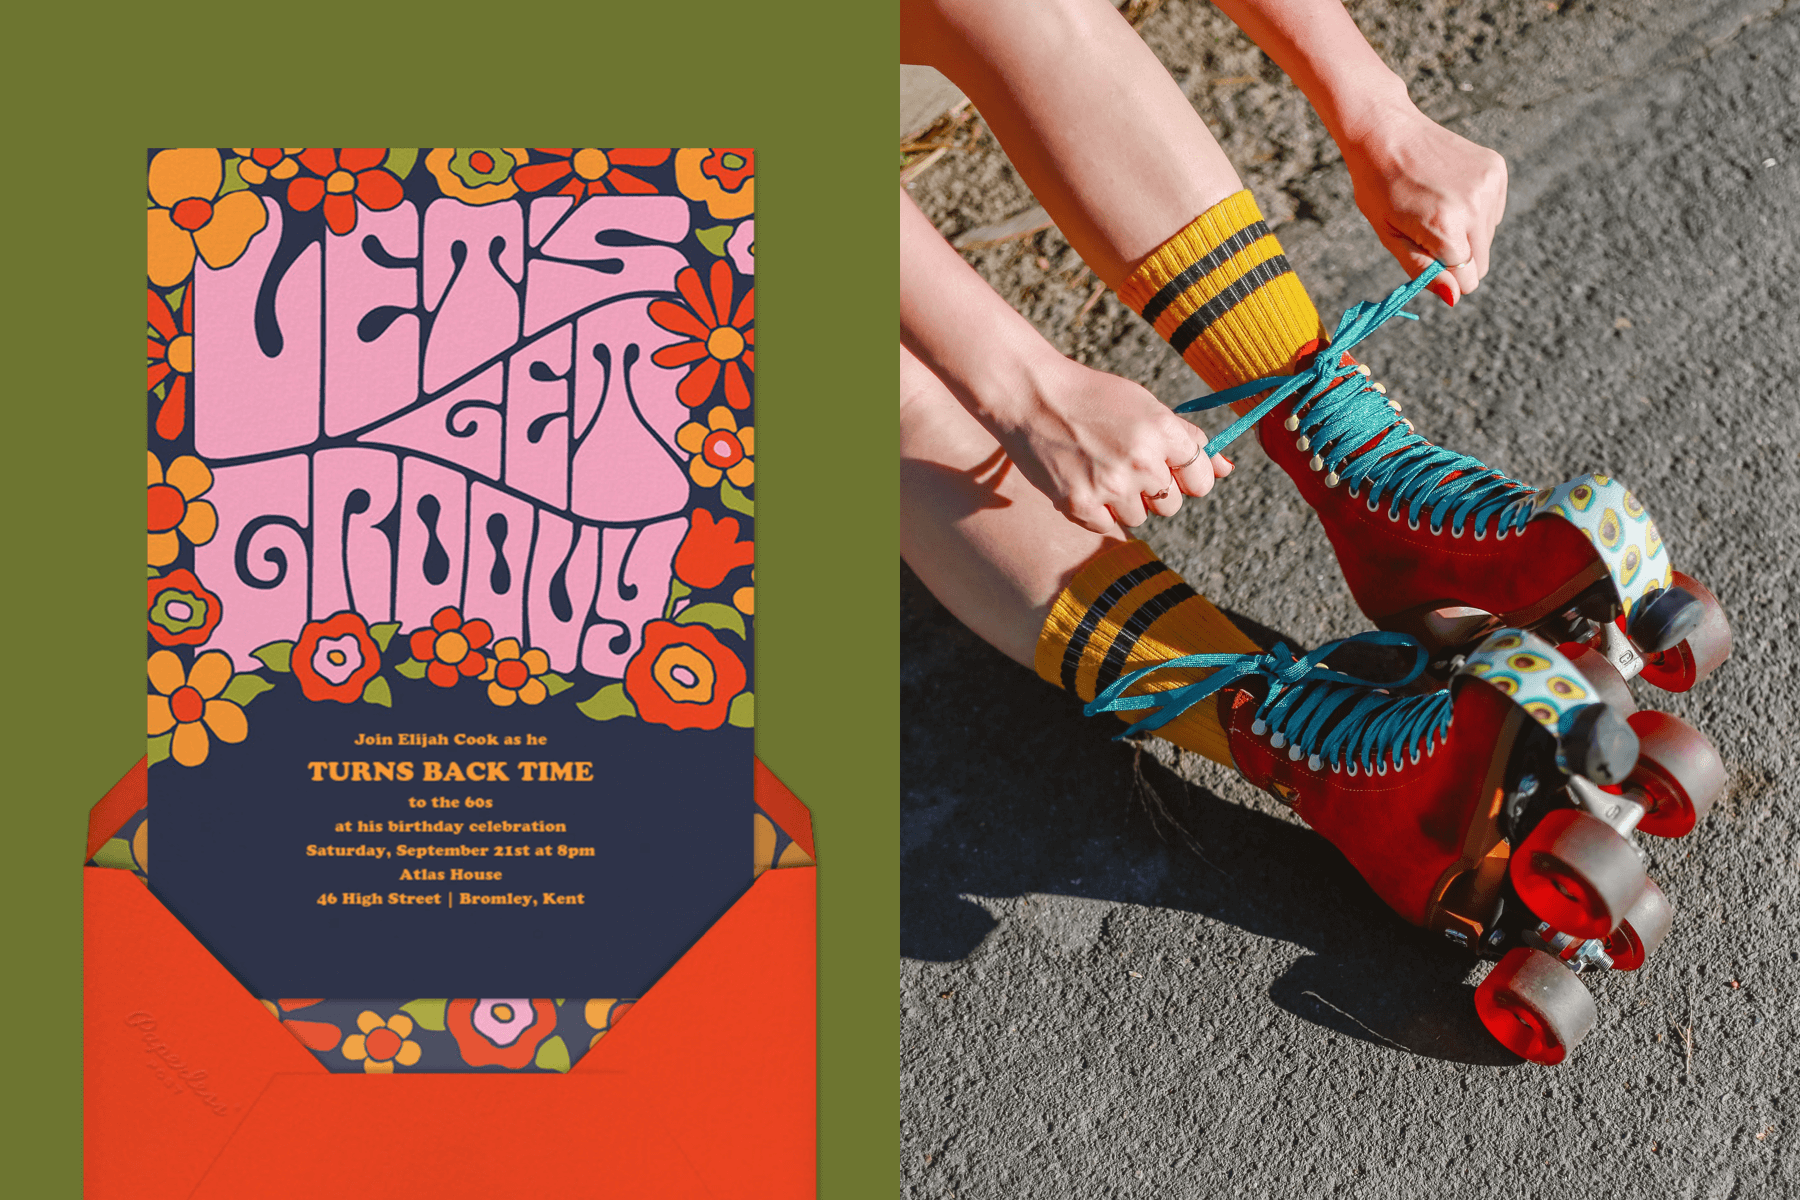 left: A ‘60s-style invitation with wavy font and colorful flowers. Right: A person laces their rollerskates.